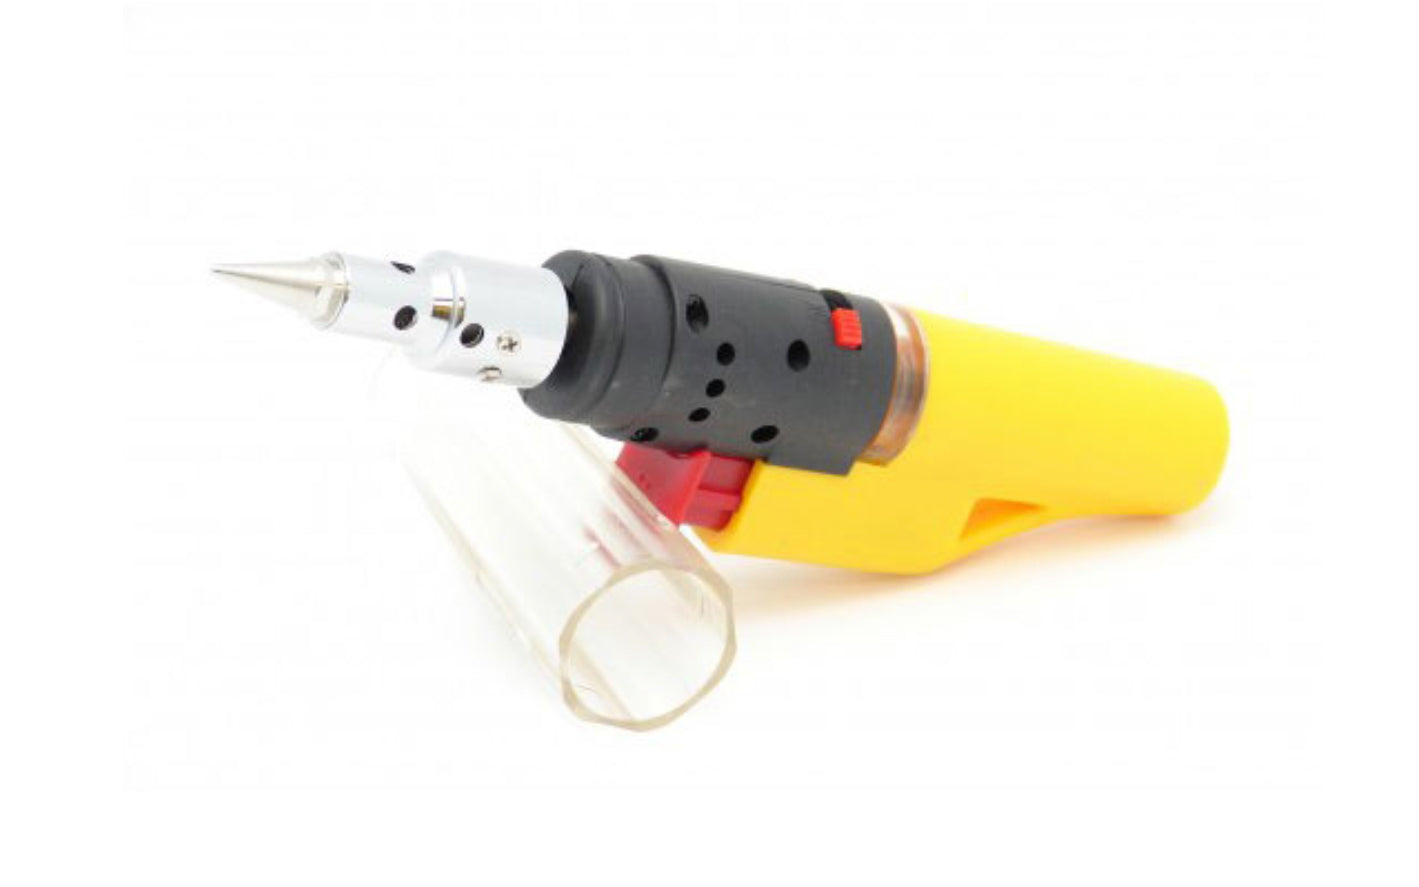 Wall Lenk "SolderPro 25" Tool ~ LSP-25. Piezo Electronic Automatic Ignition System for ease of use. Functions as both a Soldering Iron & Heat Gun. Hours of nonstop burning – 20 minutes on middle setting. Approx. temperatures – Soldering Tip (400°F – 750°F). Torch (2400°F). Cordless Butane. Wall Lenk Model LSP-25.